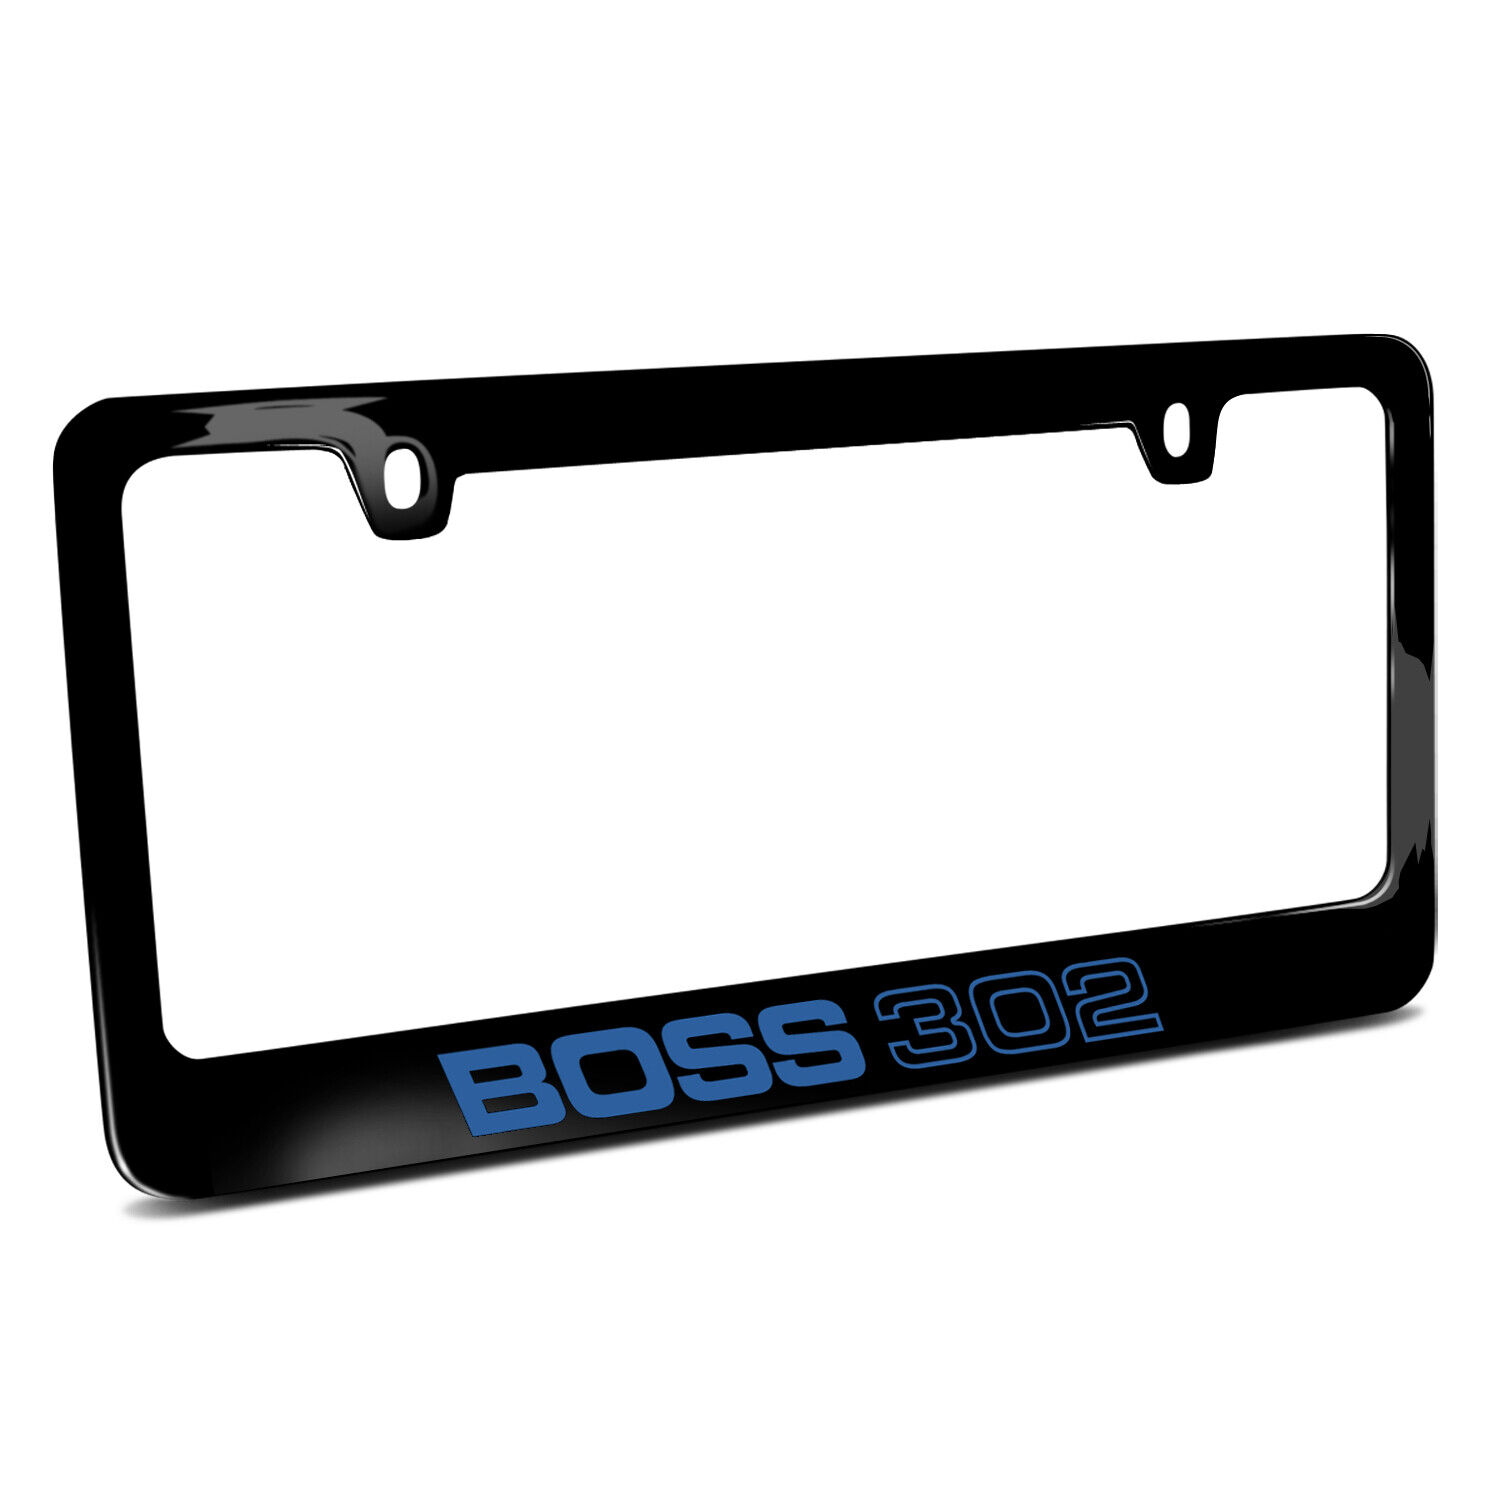 Ford Mustang Boss 302 in Blue Black Metal License Plate Frame, Made in USA